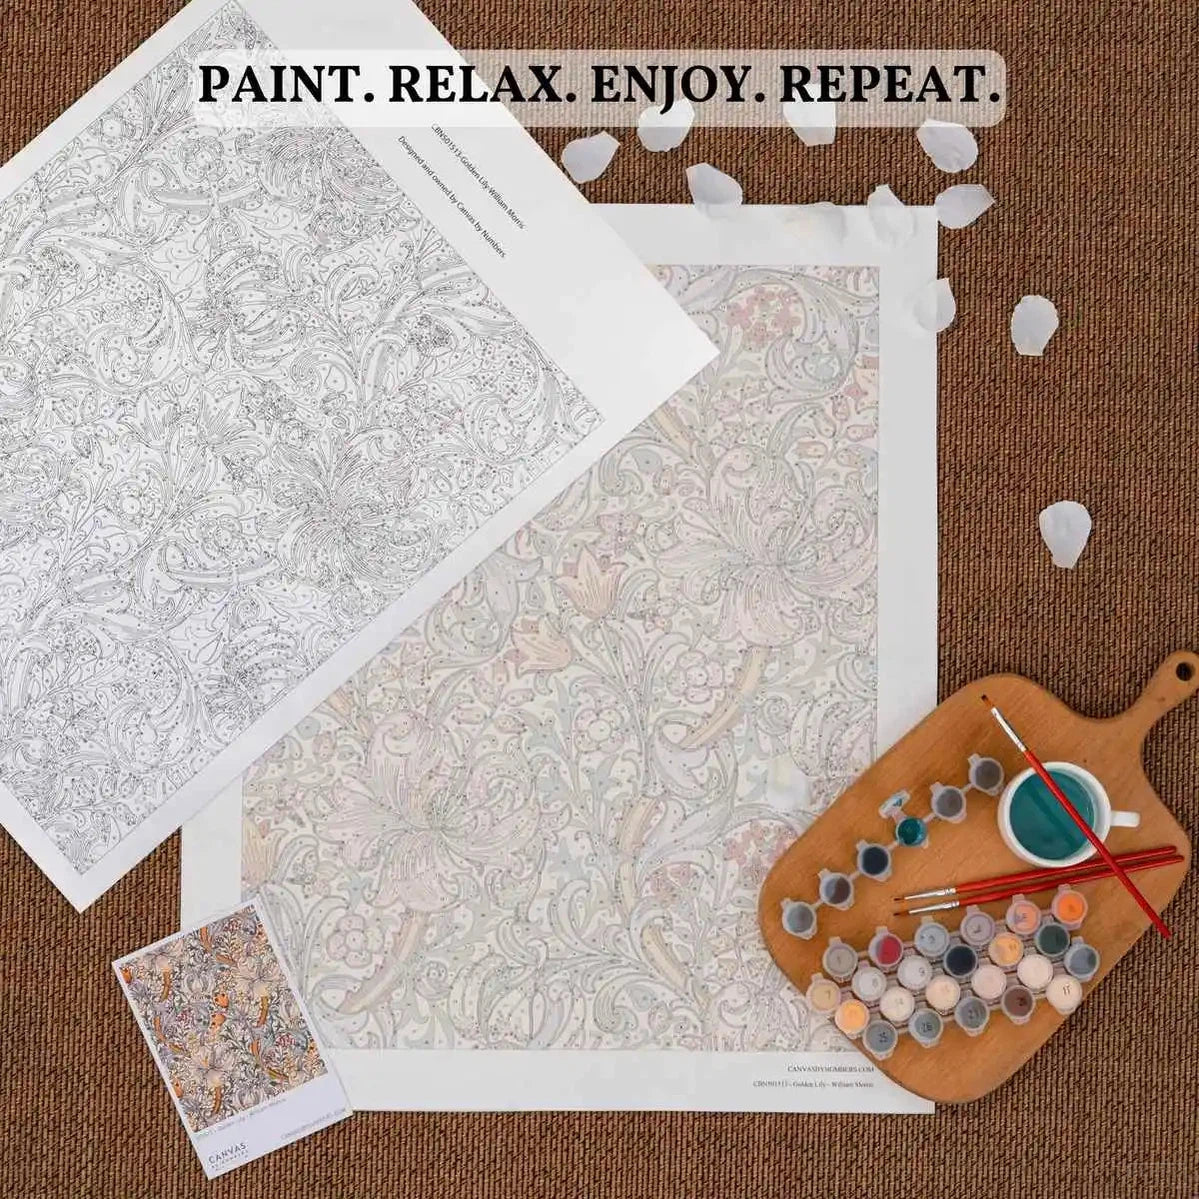 Repast of the Lion - Paint by Numbers-You'll love our Repast of the Lion - Henri Rousseau paint by numbers kit. Up to 50% Off! Free shipping and 60 days money-back at Canvas by Numbers.-Canvas by Numbers